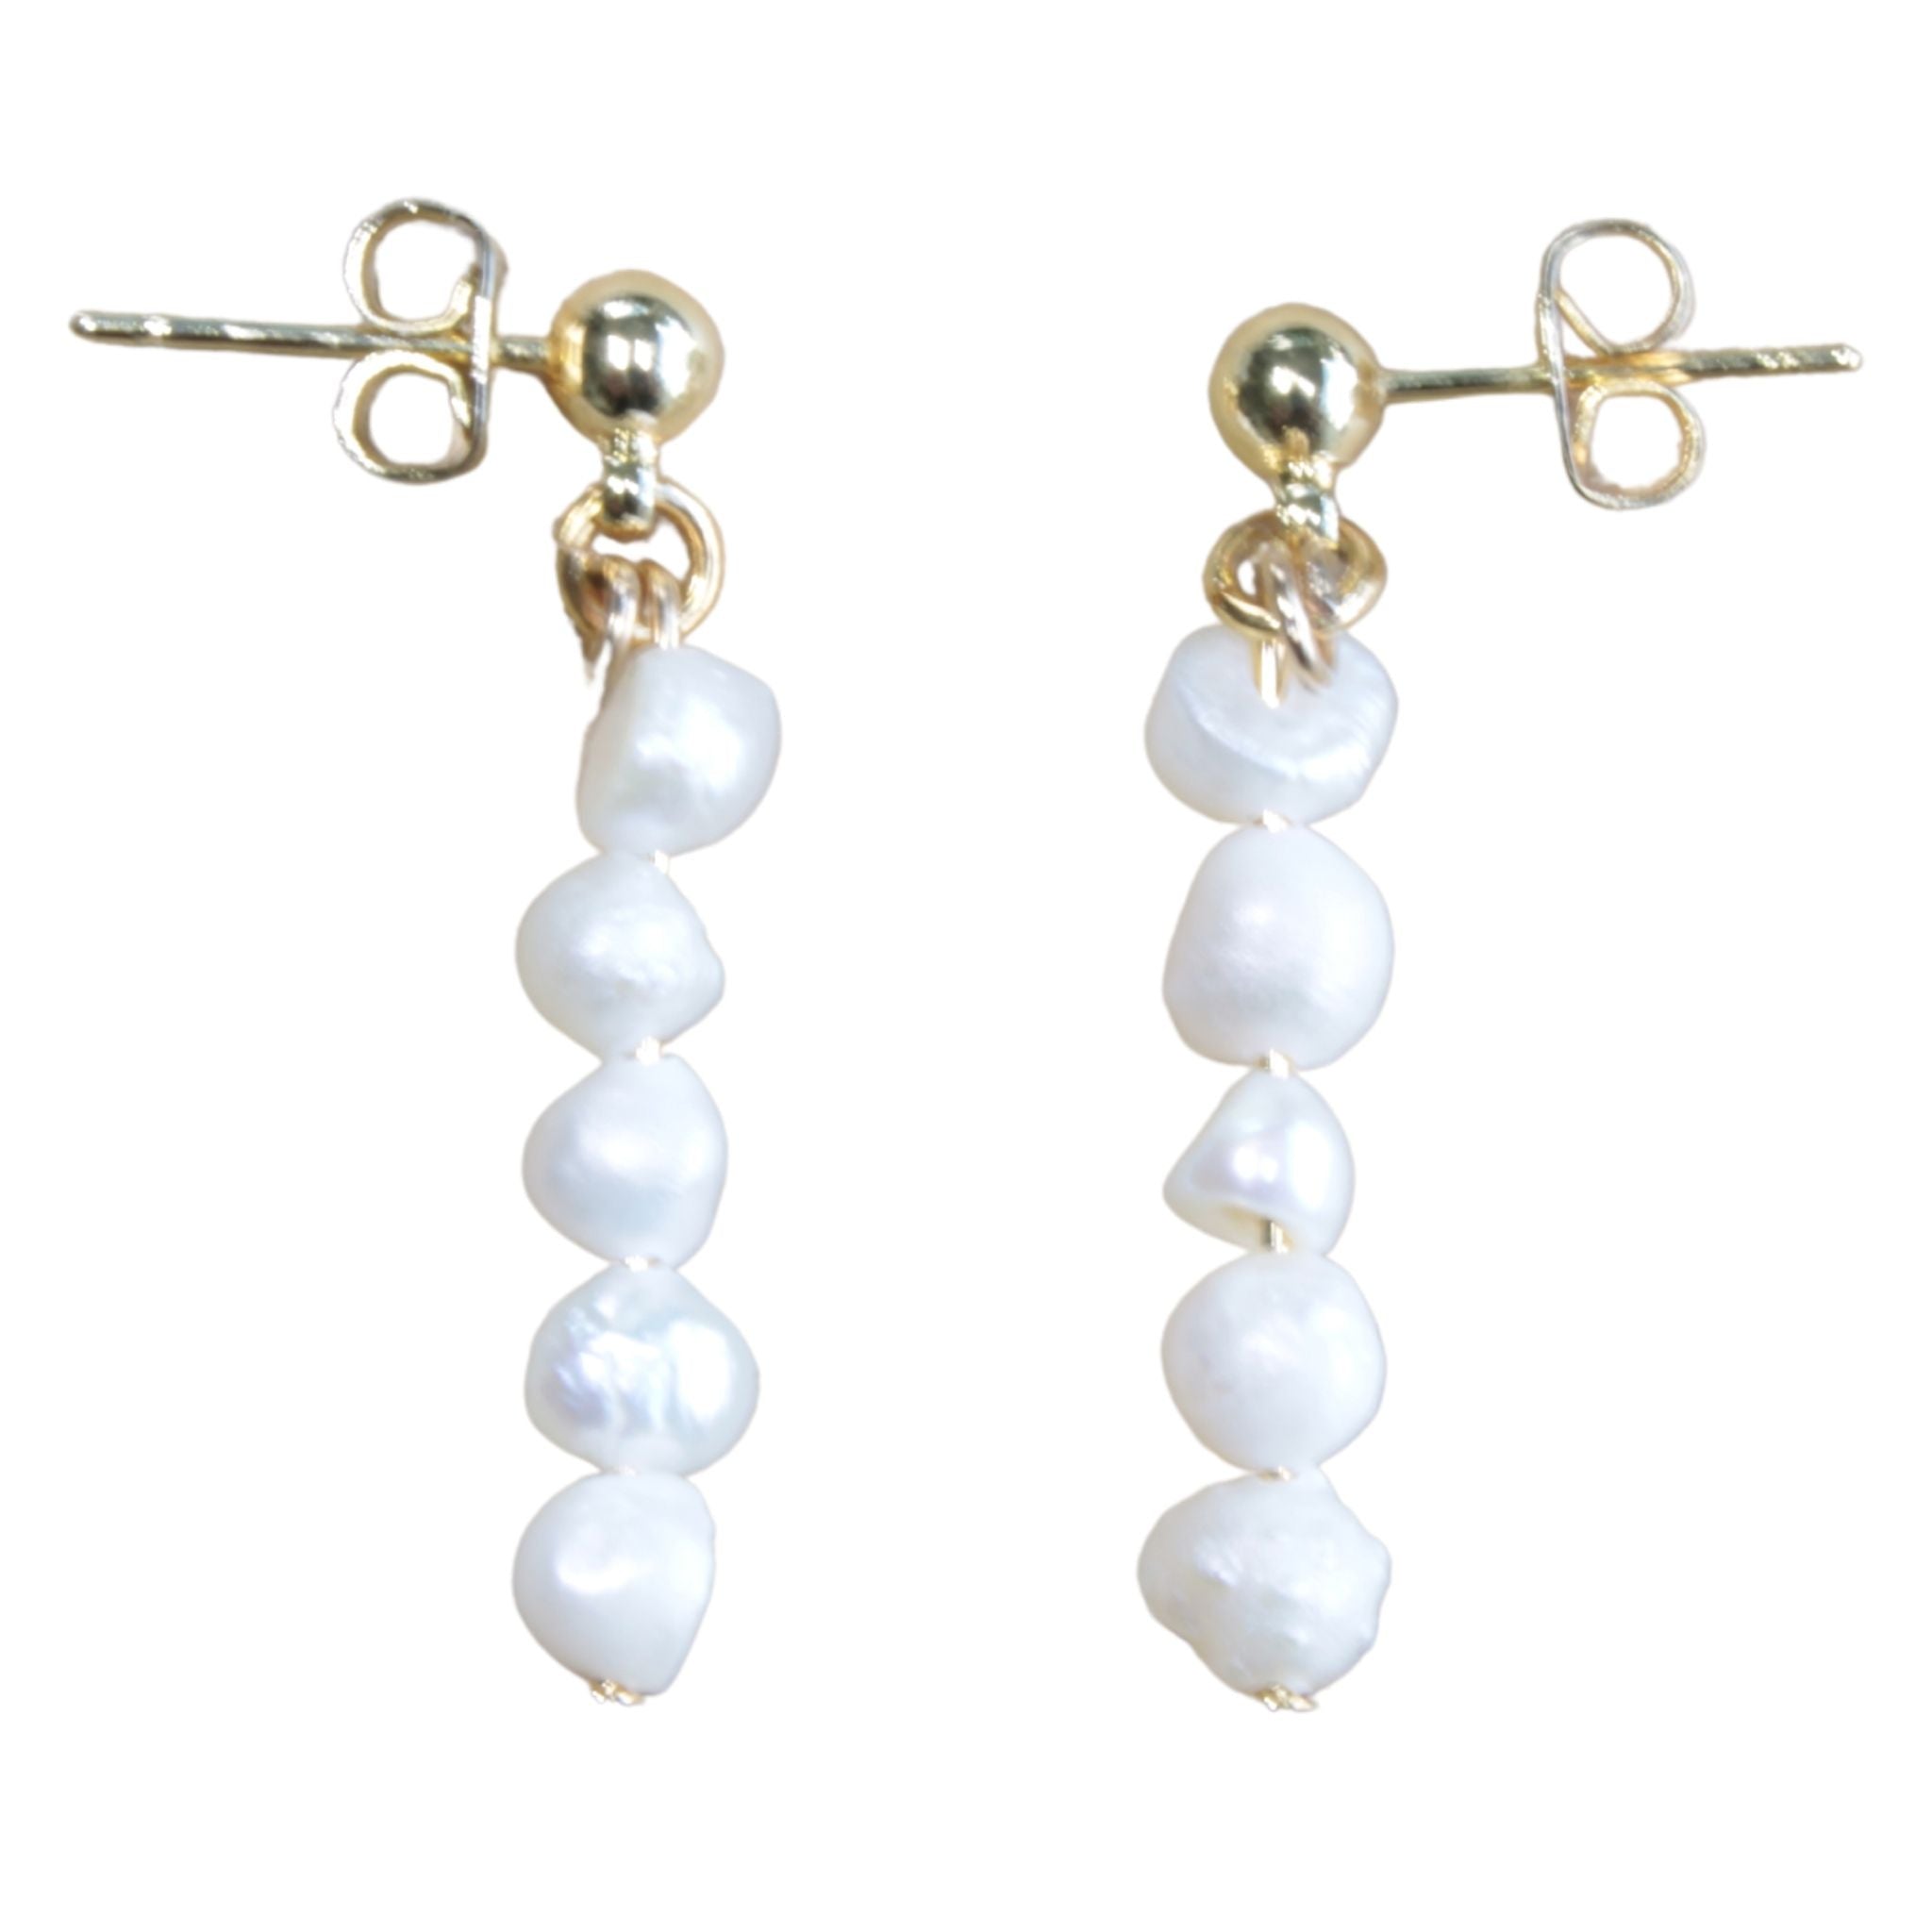 Gold Plated Stud Earrings with Freshwater Pearl Drop